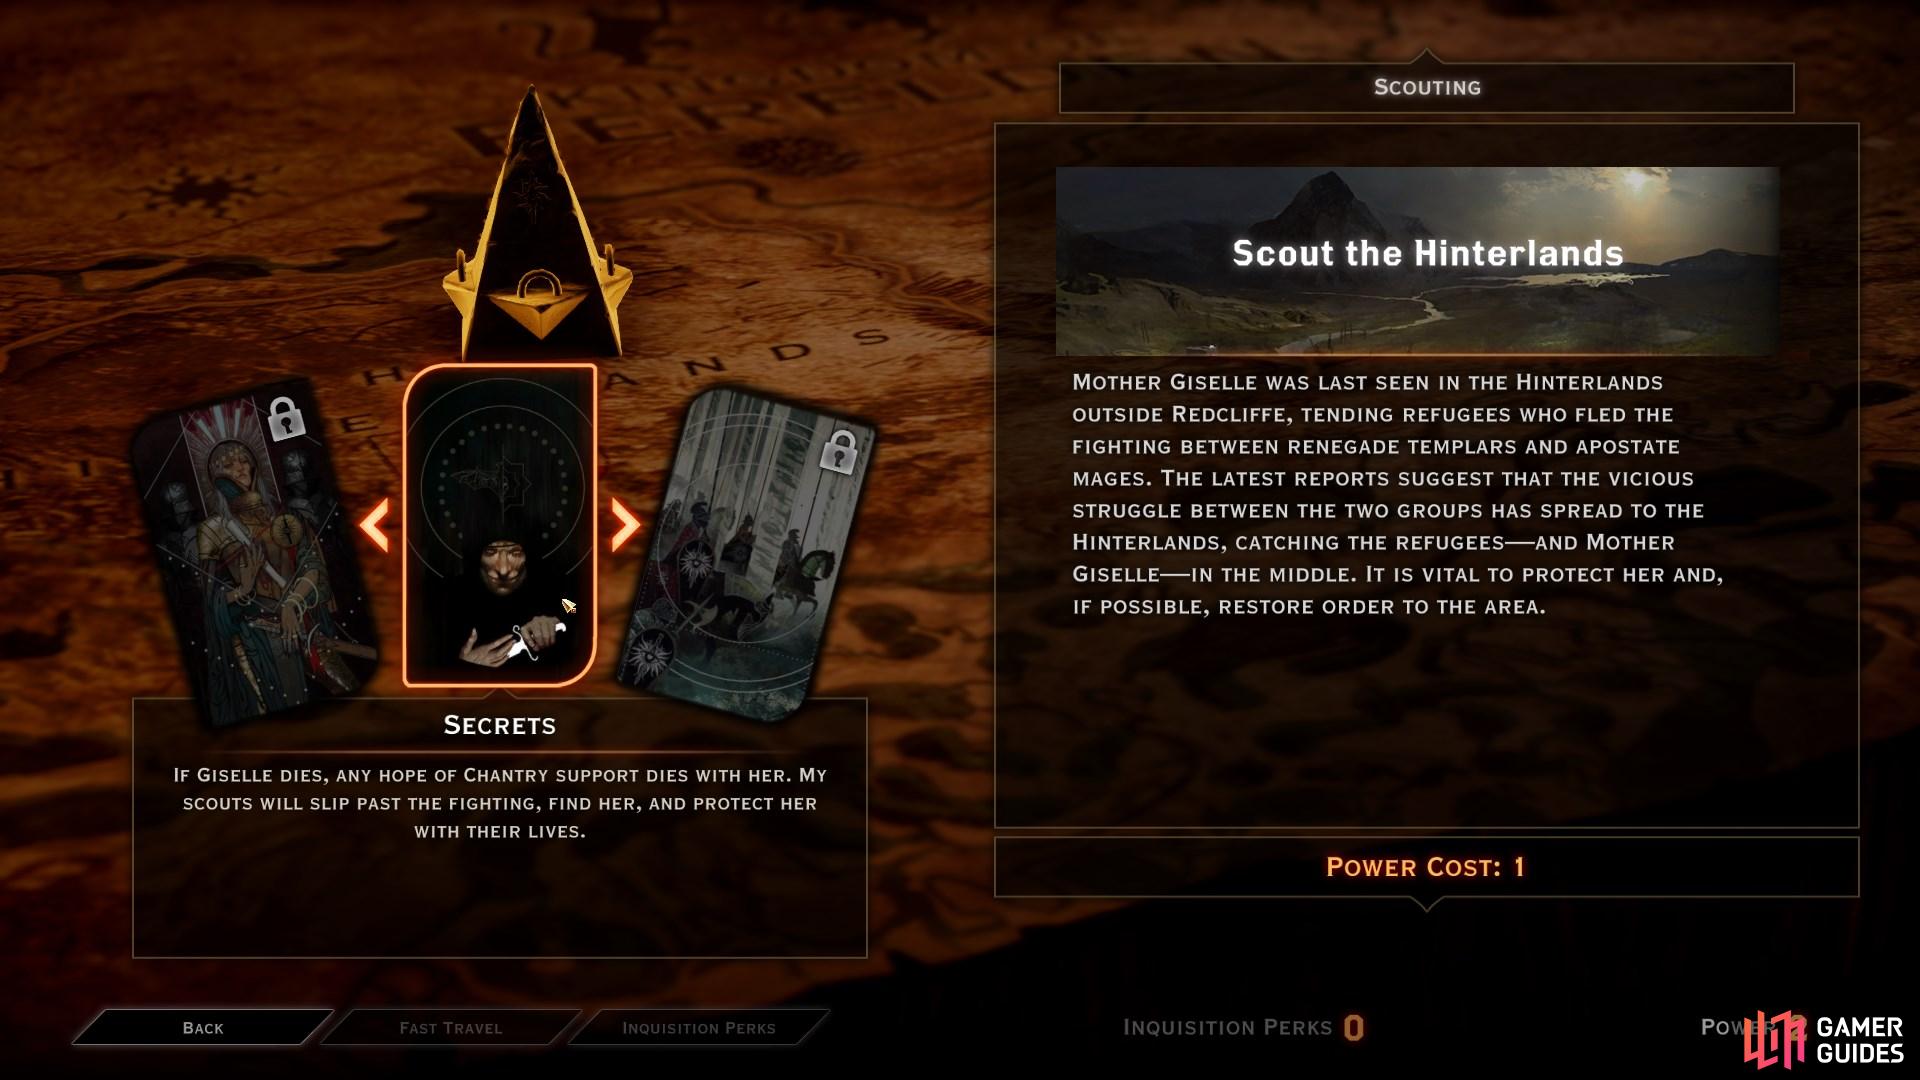 Choose 'Secrets' to spend 1 Power, granting you access to Scout the Hinterlands.